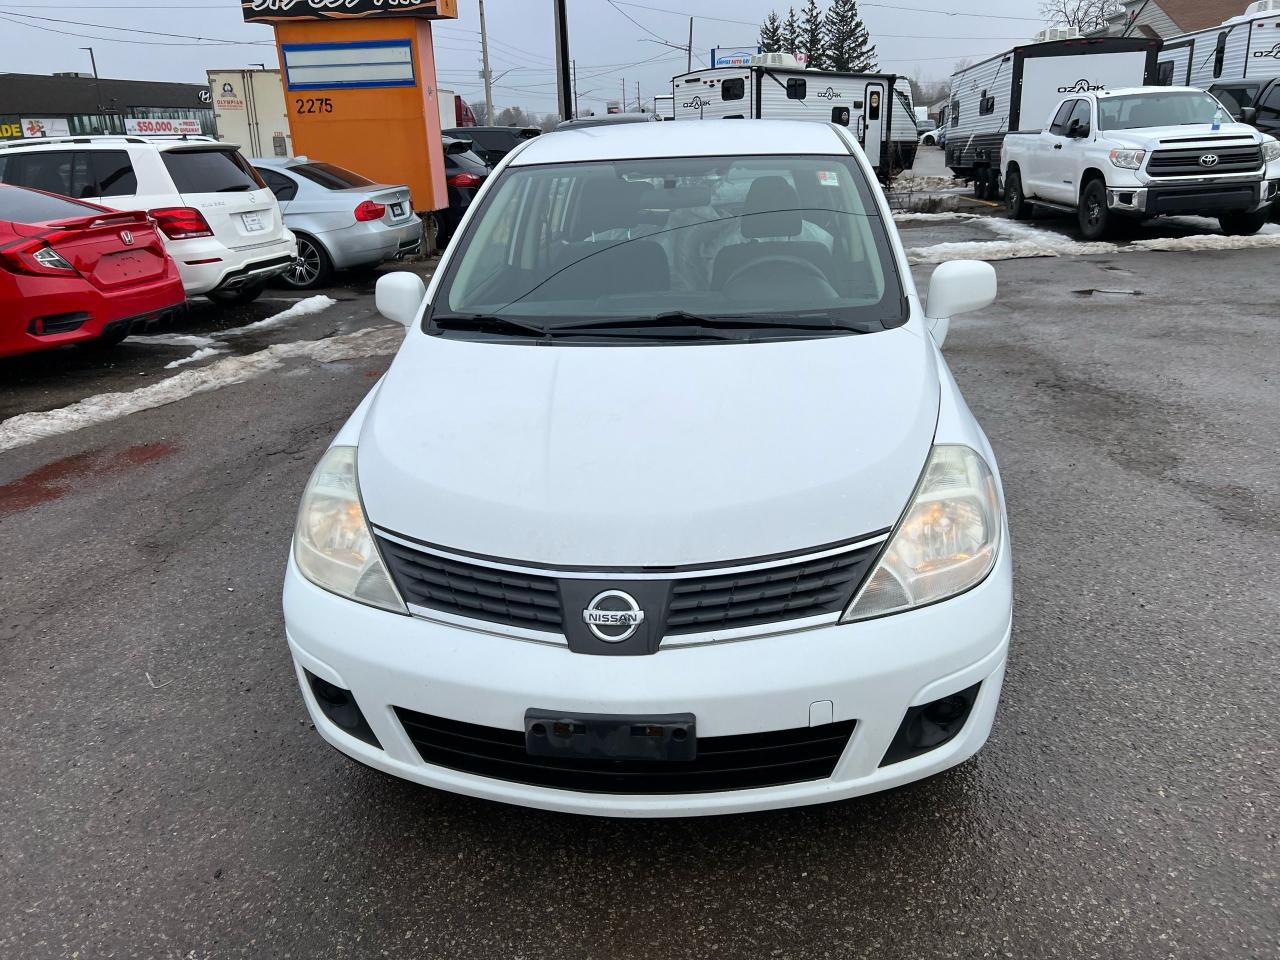 2009 Nissan Versa 1.8 S**MANUAL**NO ACCIDENTS**CERTIFIED - Photo #8